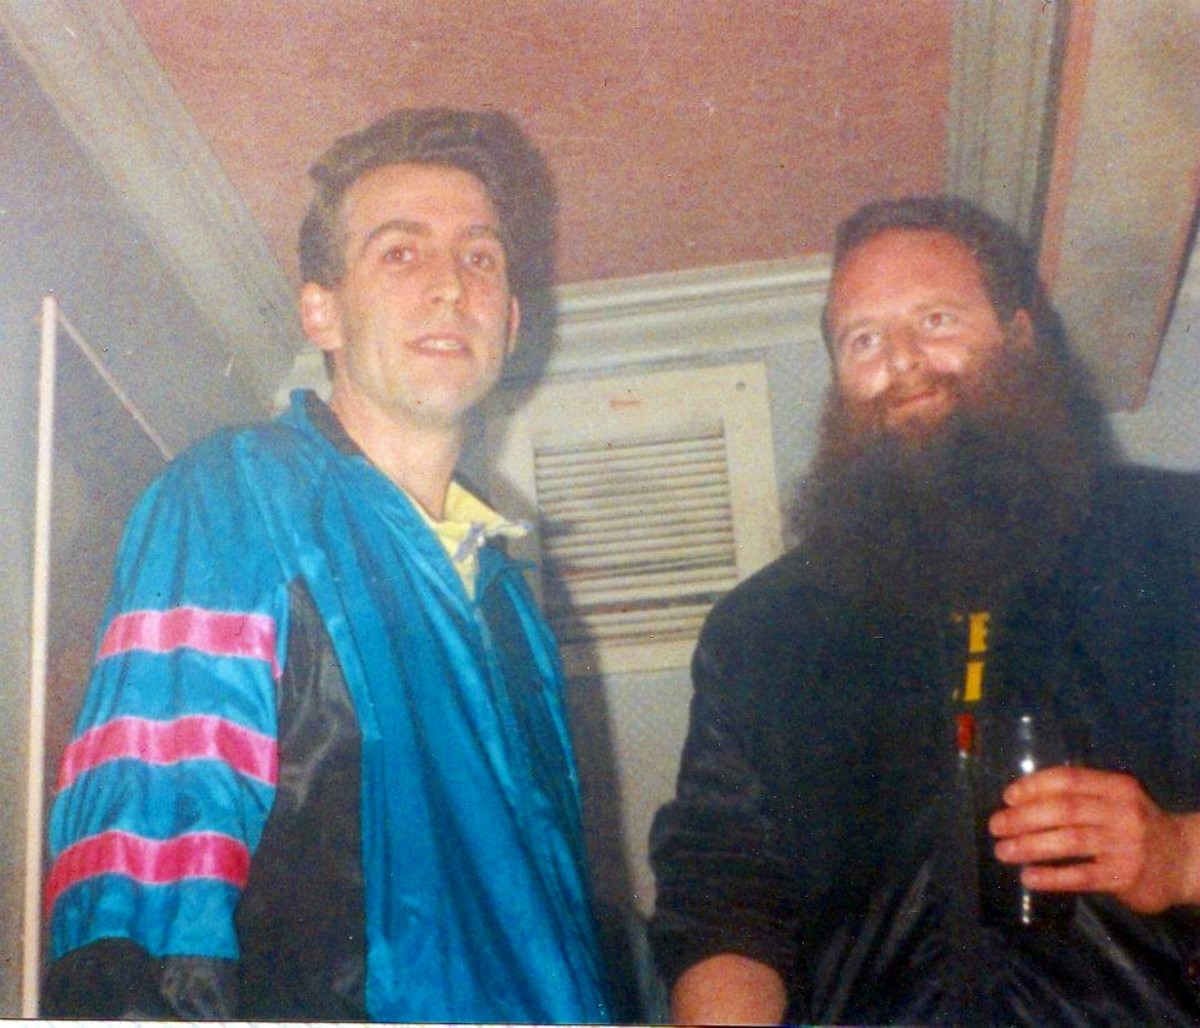 Glen on the left, pictured with Chris, one of the doormen, at Monroes, Great Harwood (1990).